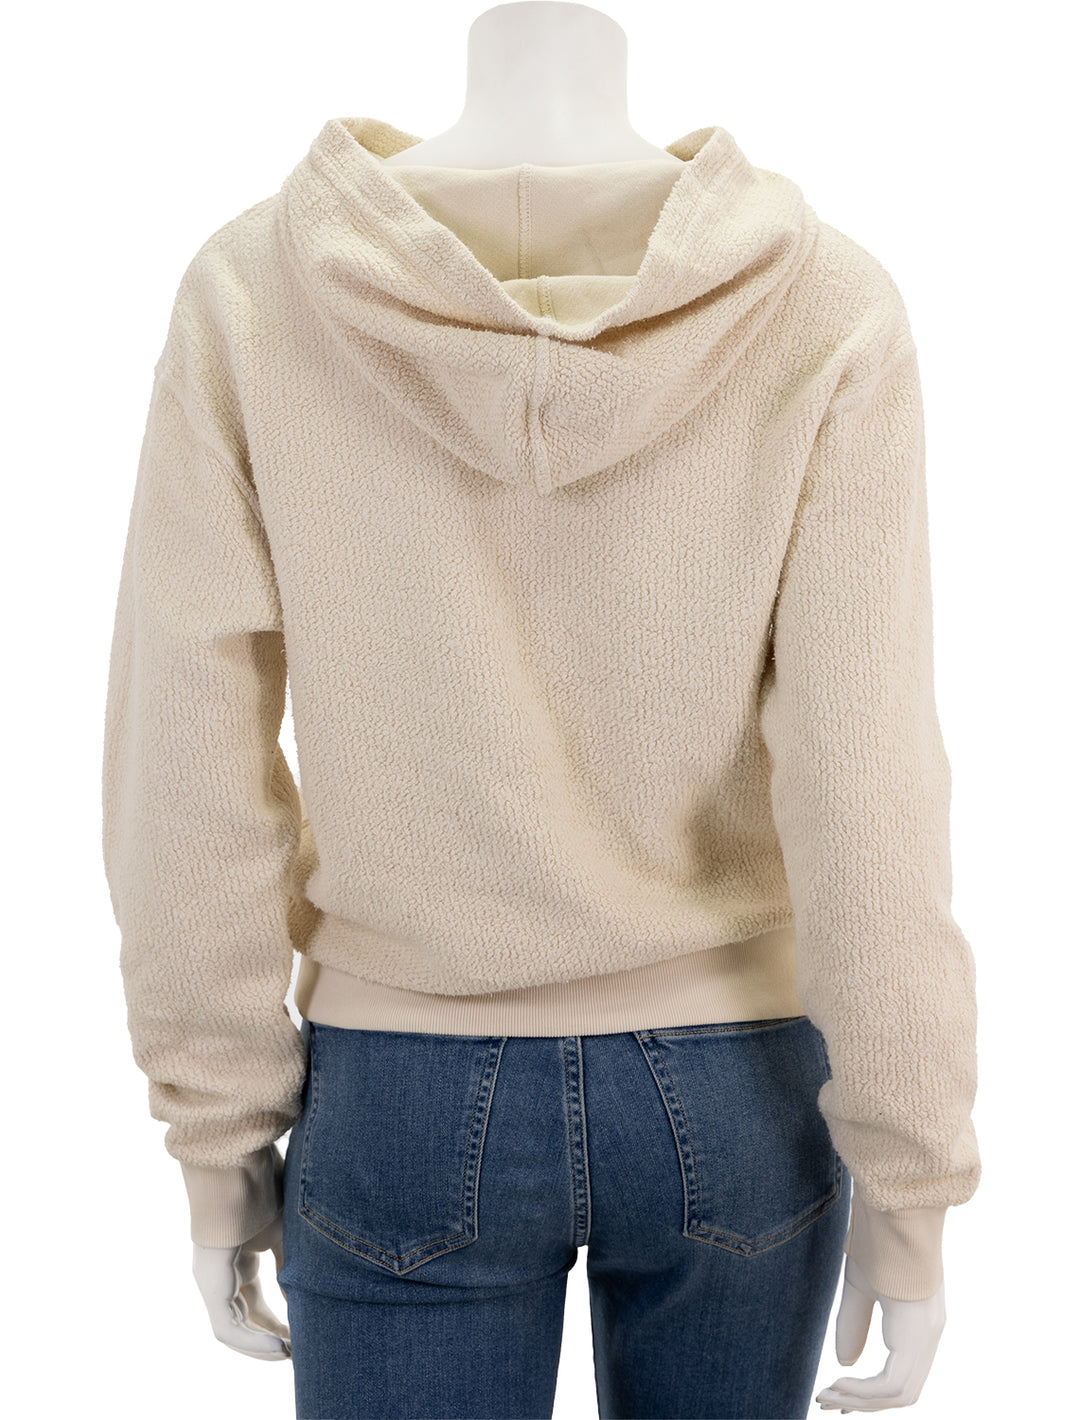 Back view of Perfectwhitetee's reese hoodie in sugar.